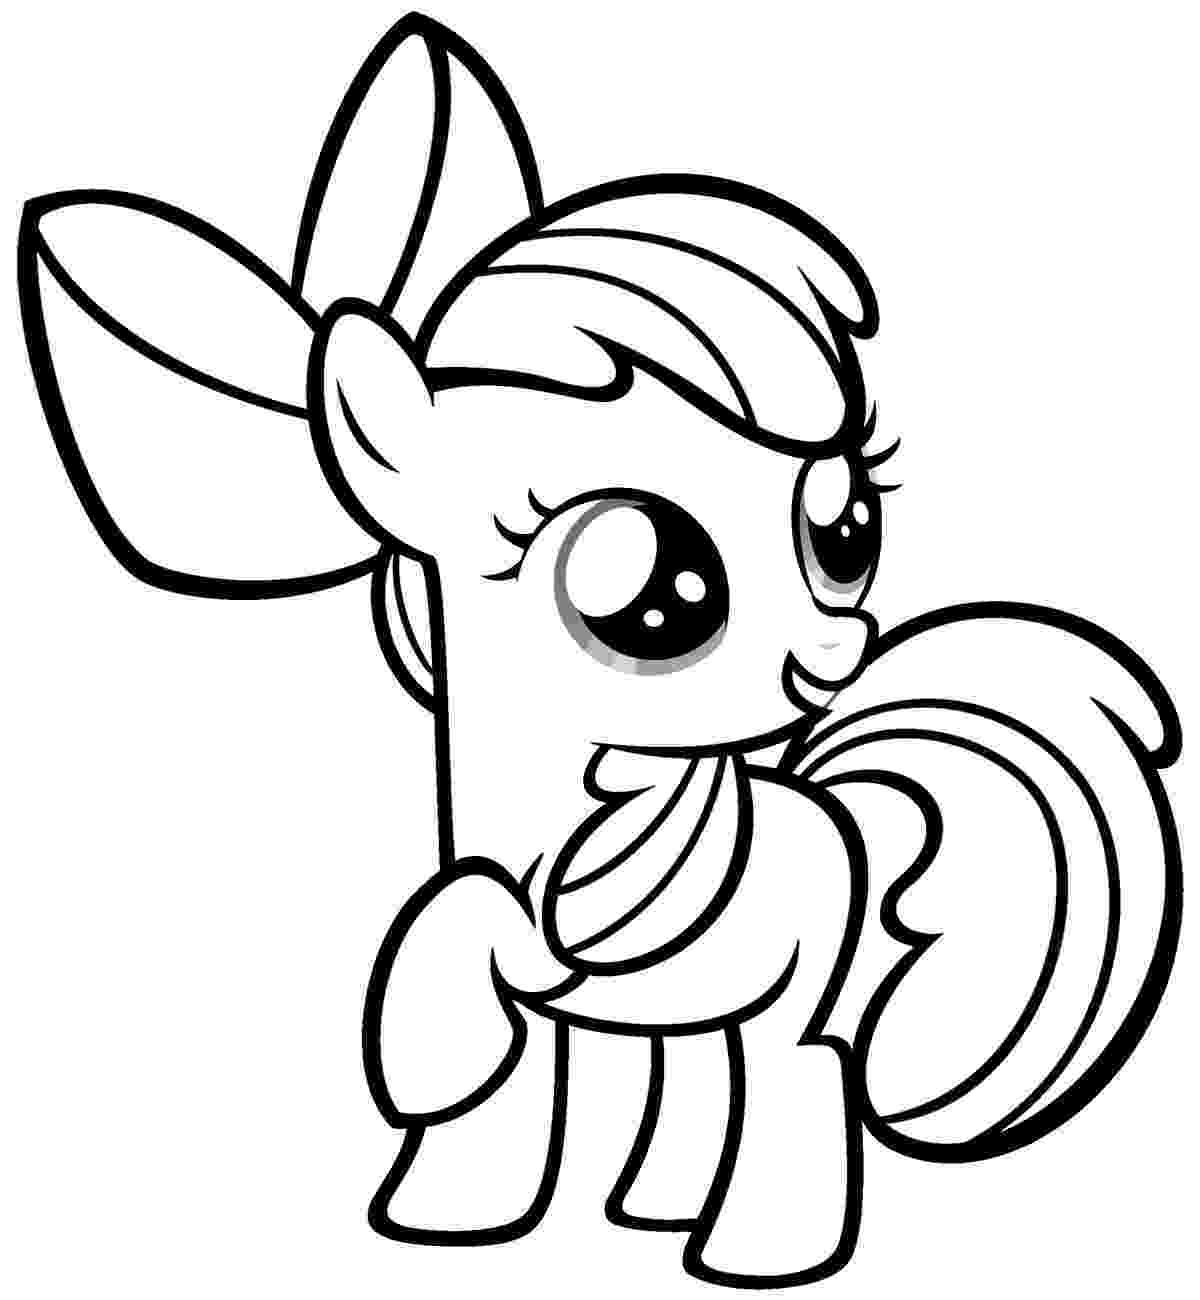 my little pony apple bloom coloring pages my little pony apple bloom coloring pages little apple pony coloring pages bloom my 